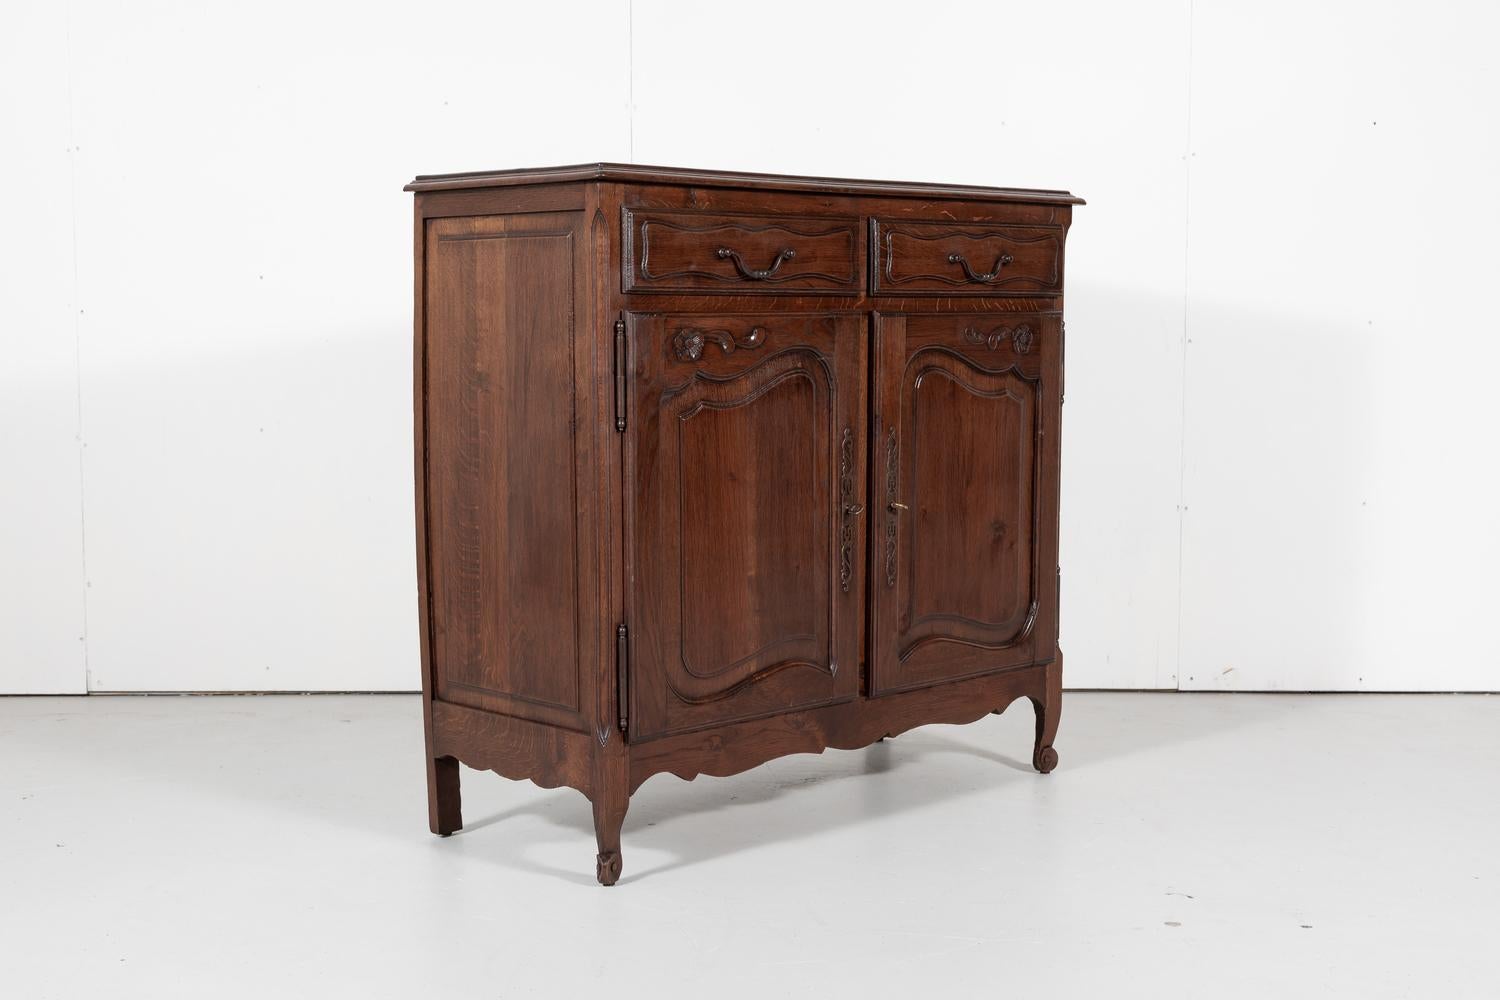 Charming country French oak Louis XV style buffet d'appui or gentleman's buffet, circa 1930s. Two drawers over two doors above a scalloped apron with foliate carvings. Rests on short cabriole legs ending in scrolled toes. Gentleman buffets like this